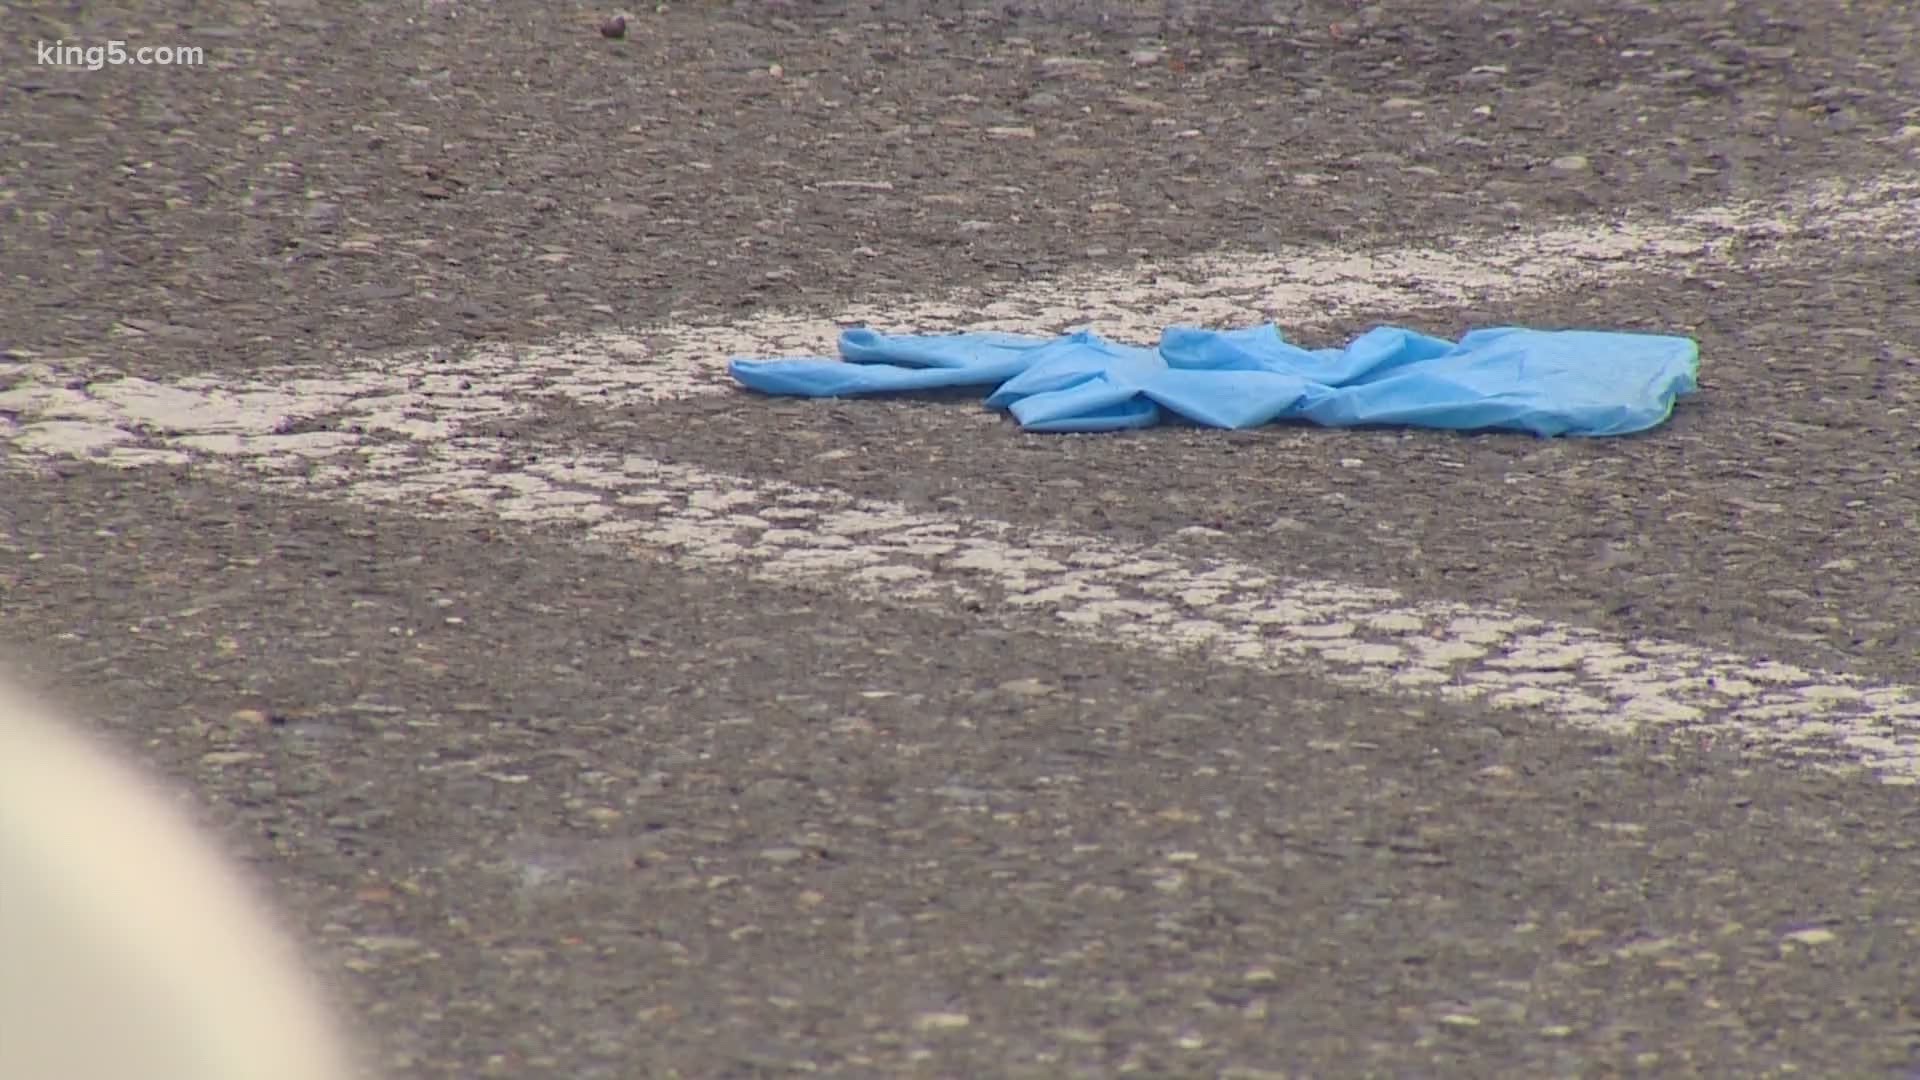 Grocery store employees are dealing with a massive littering problem as people leave their disposable gloves behind in parking lots.